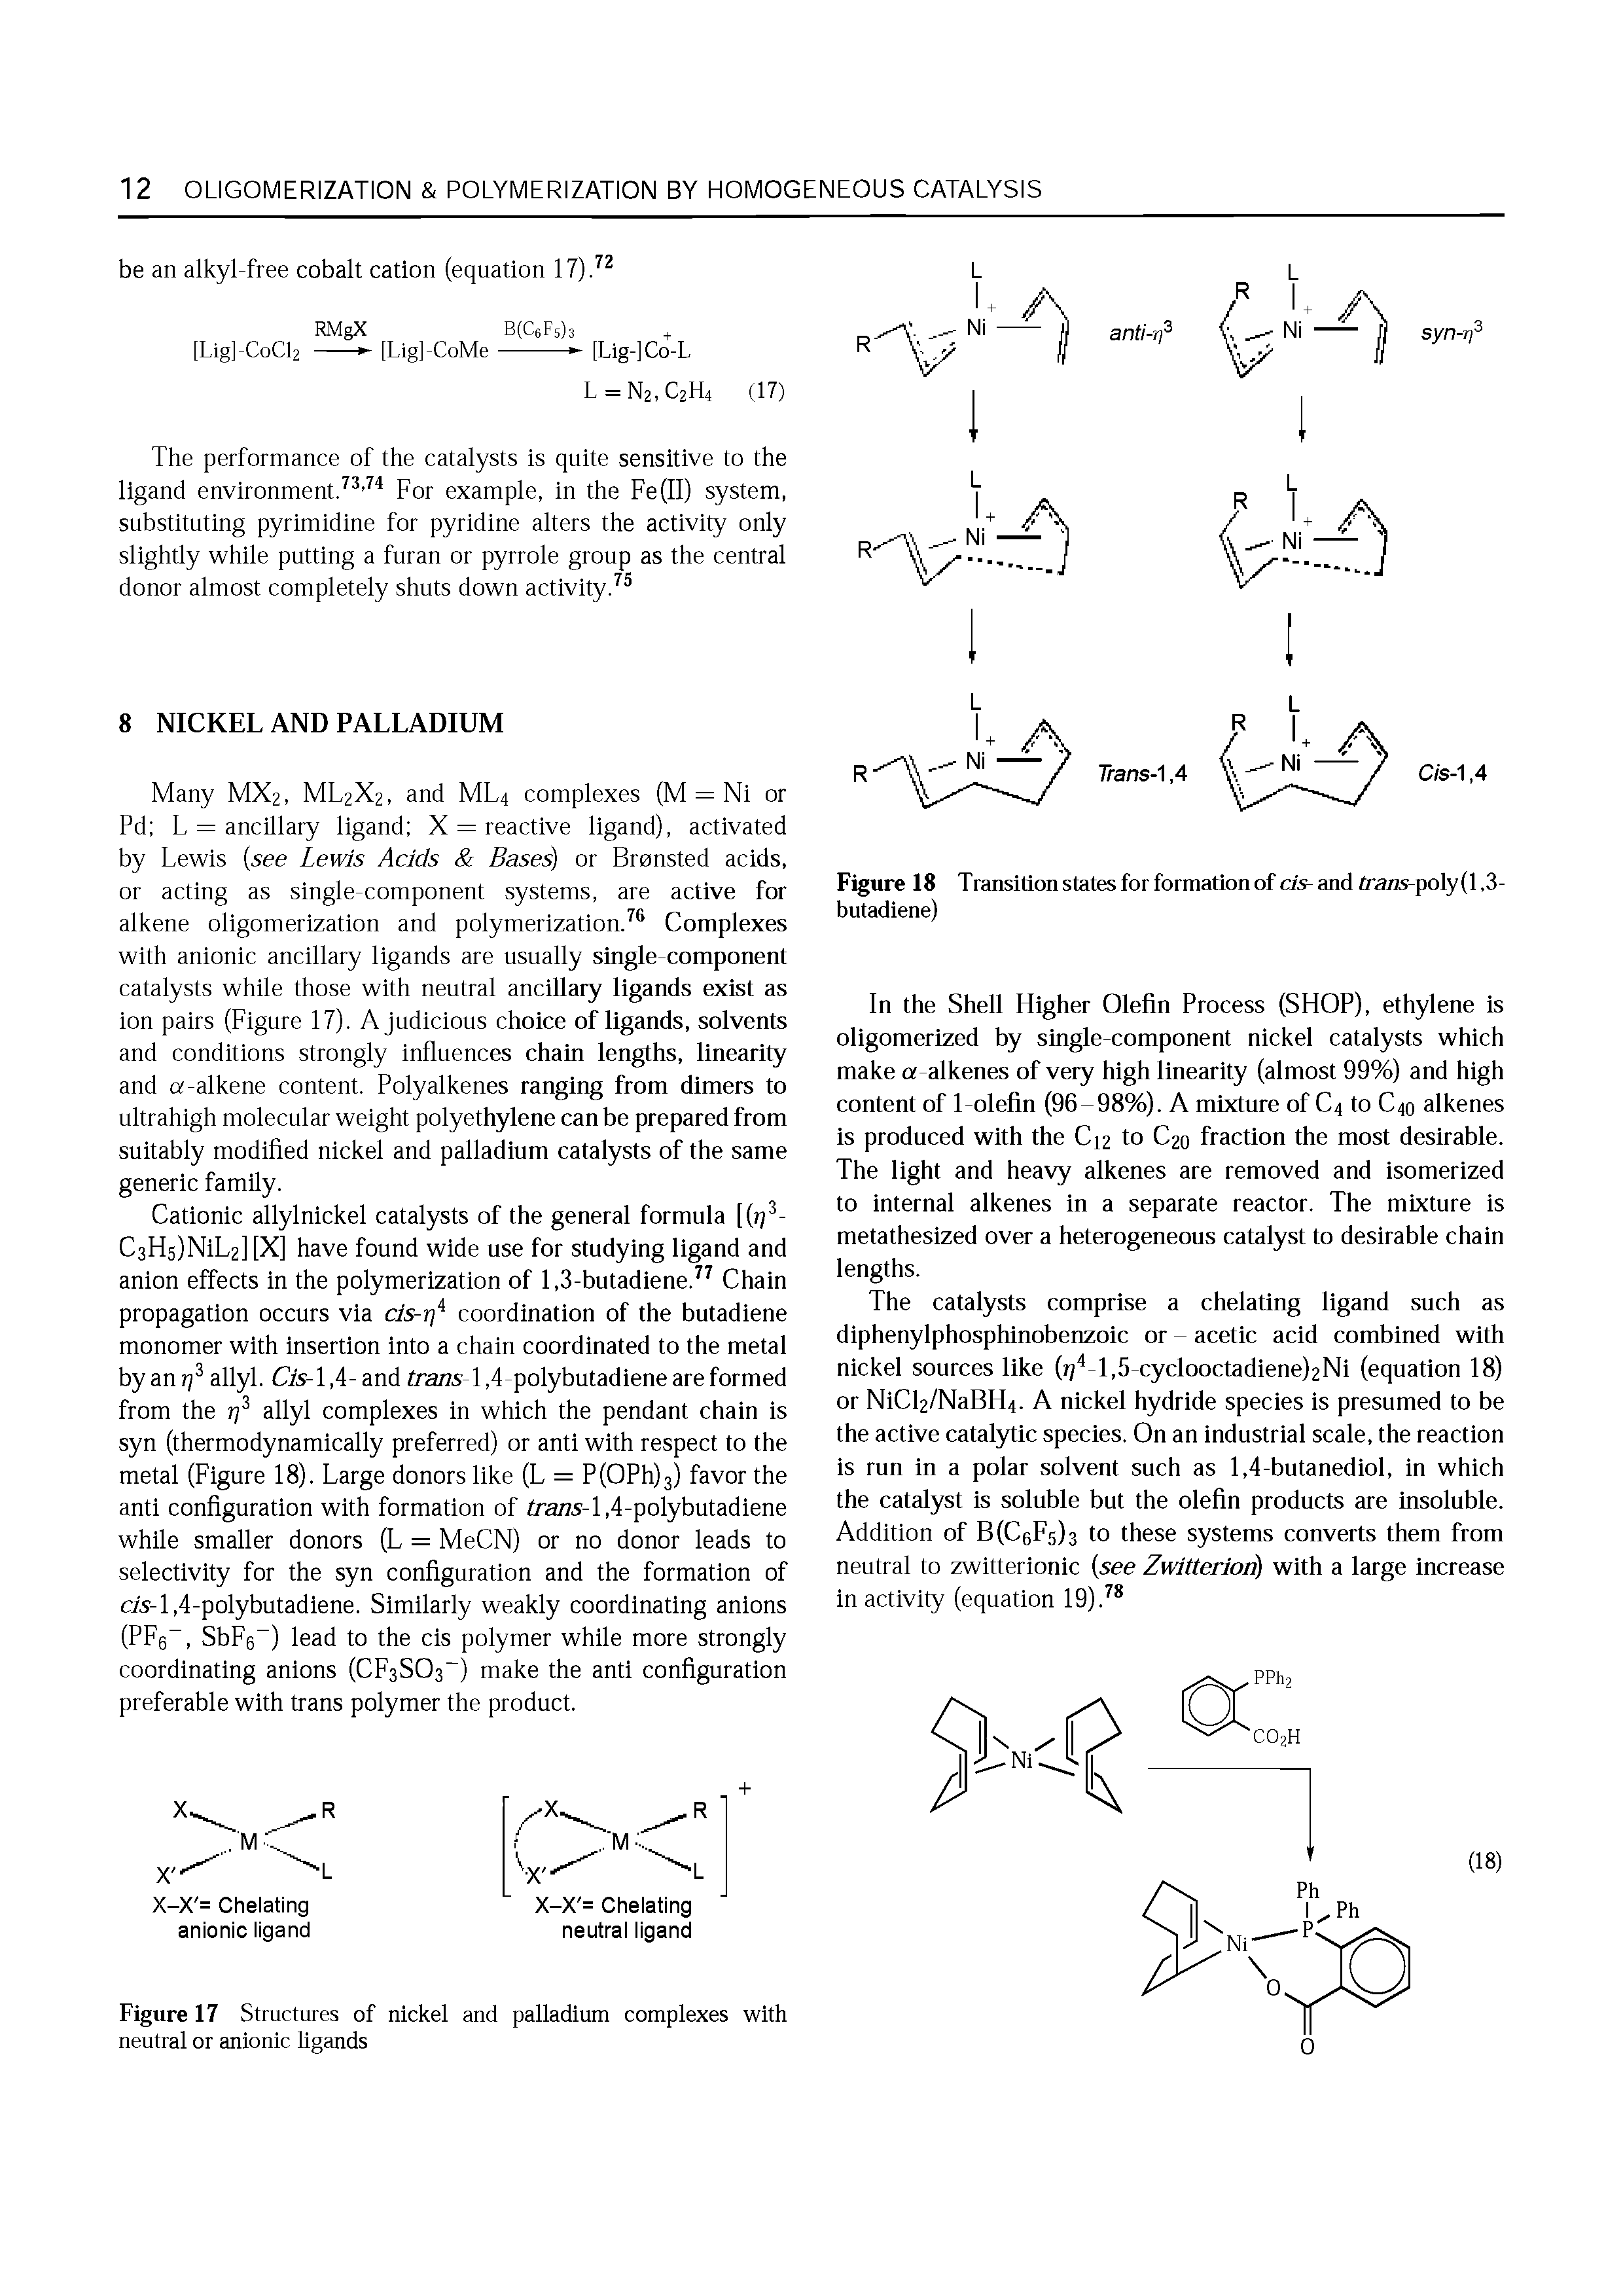 Figure 18 Transition states for formation of c/s and trans-poly (1,3-butadiene)...